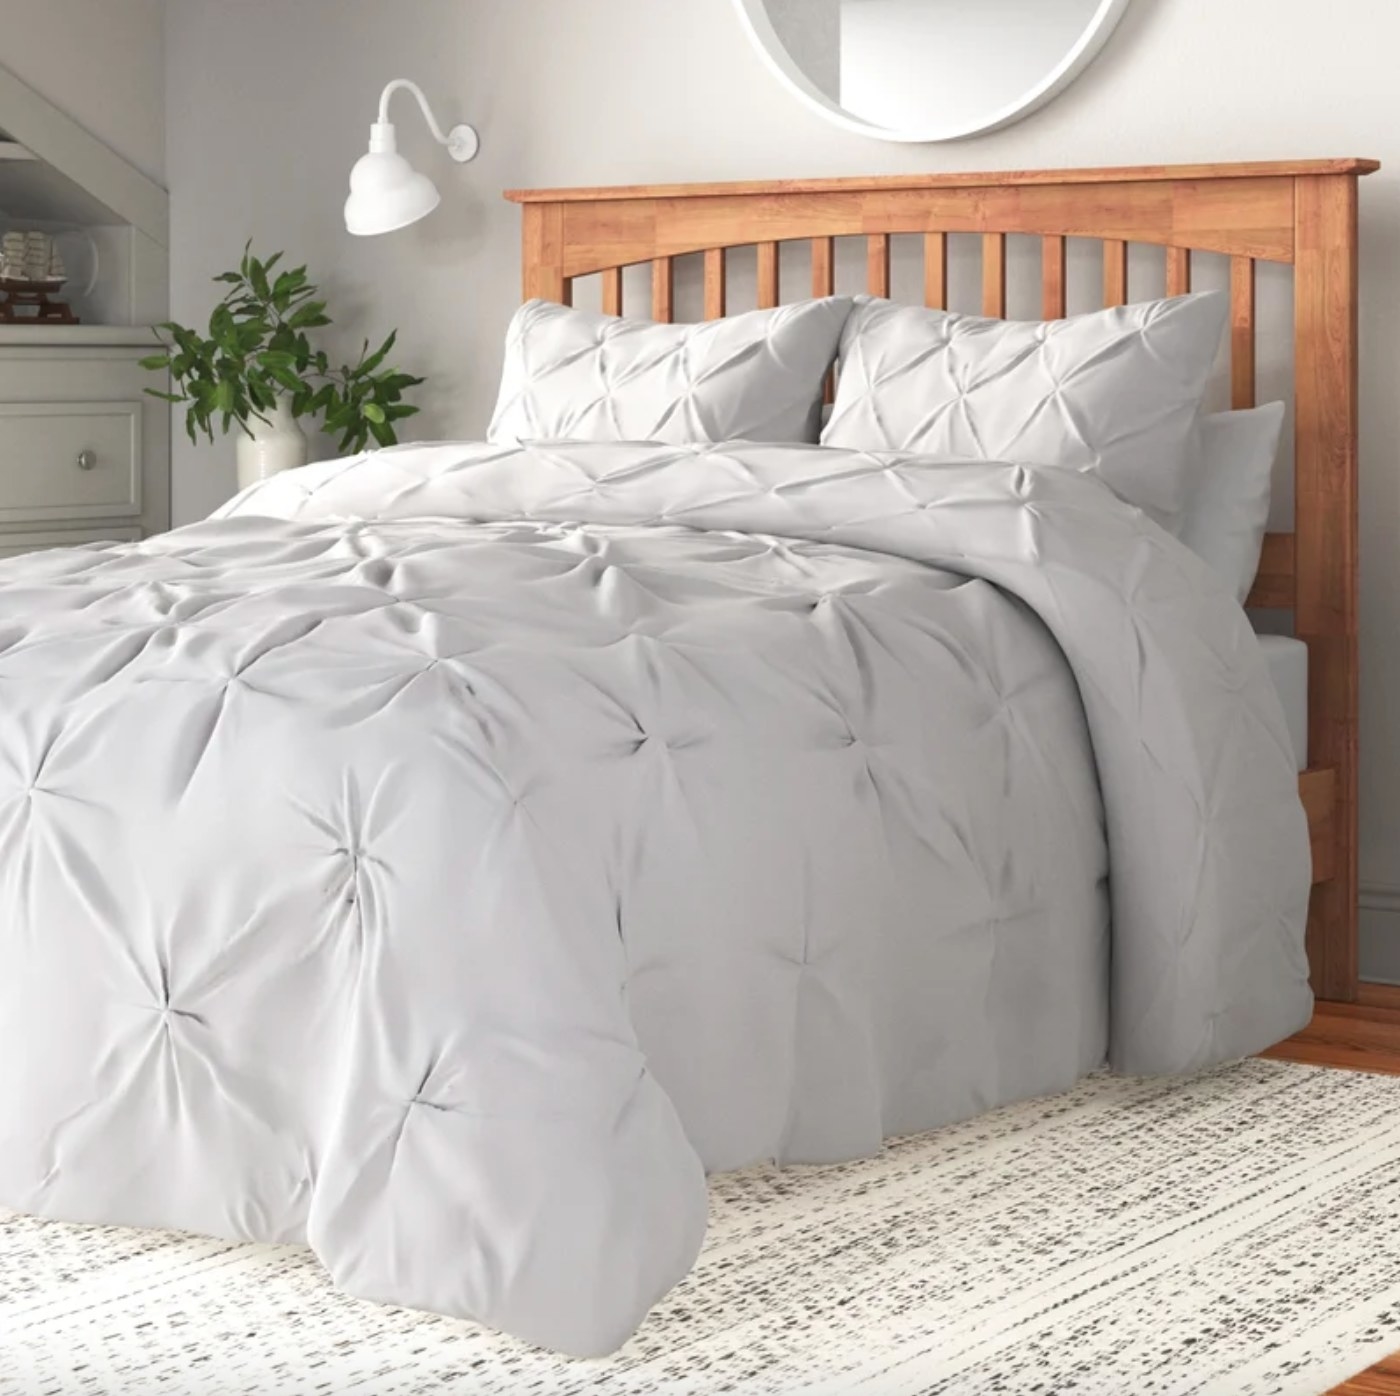 the comforter set in tufted white